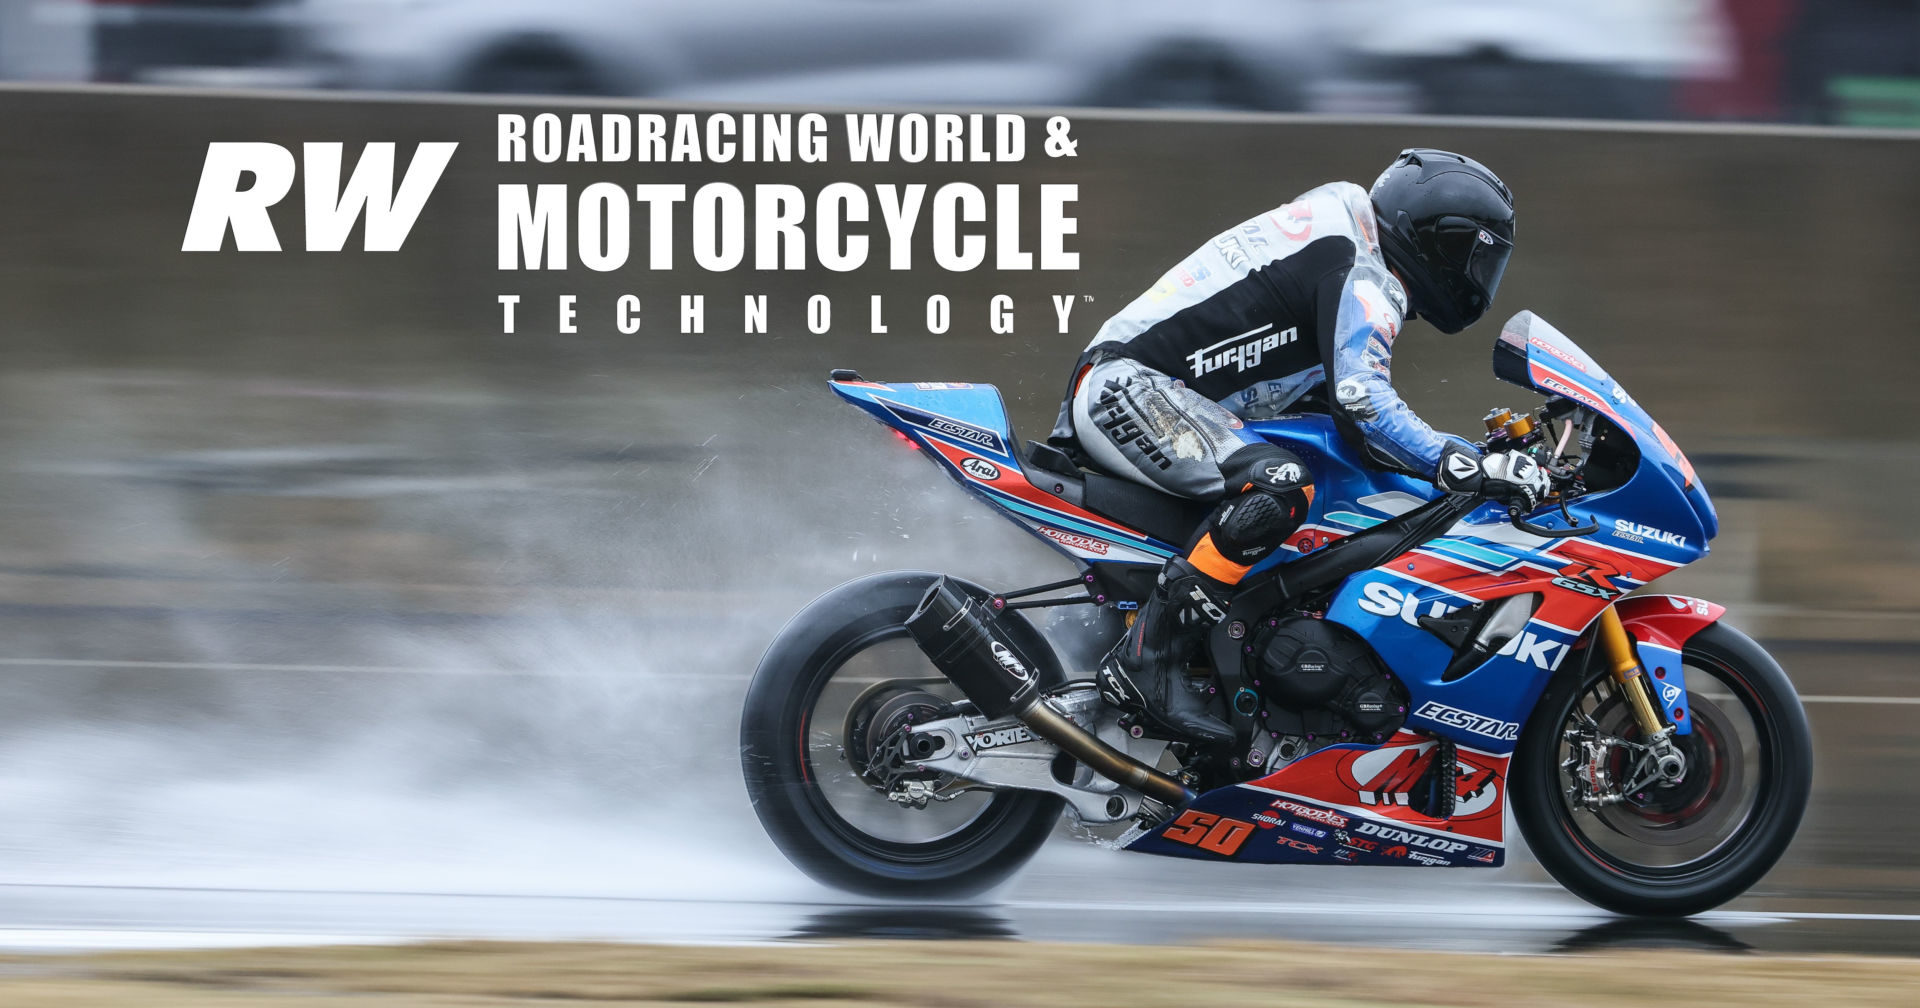 2019 MotoAmerica Supersport Champion Bobby Fong (50) riding his new M4 ECSTAR Suzuki GSX-R1000 Superbike in the wet during the official MotoAmerica pre-season test at Barber Motorsports Park. Photo by Brian J. Nelson.